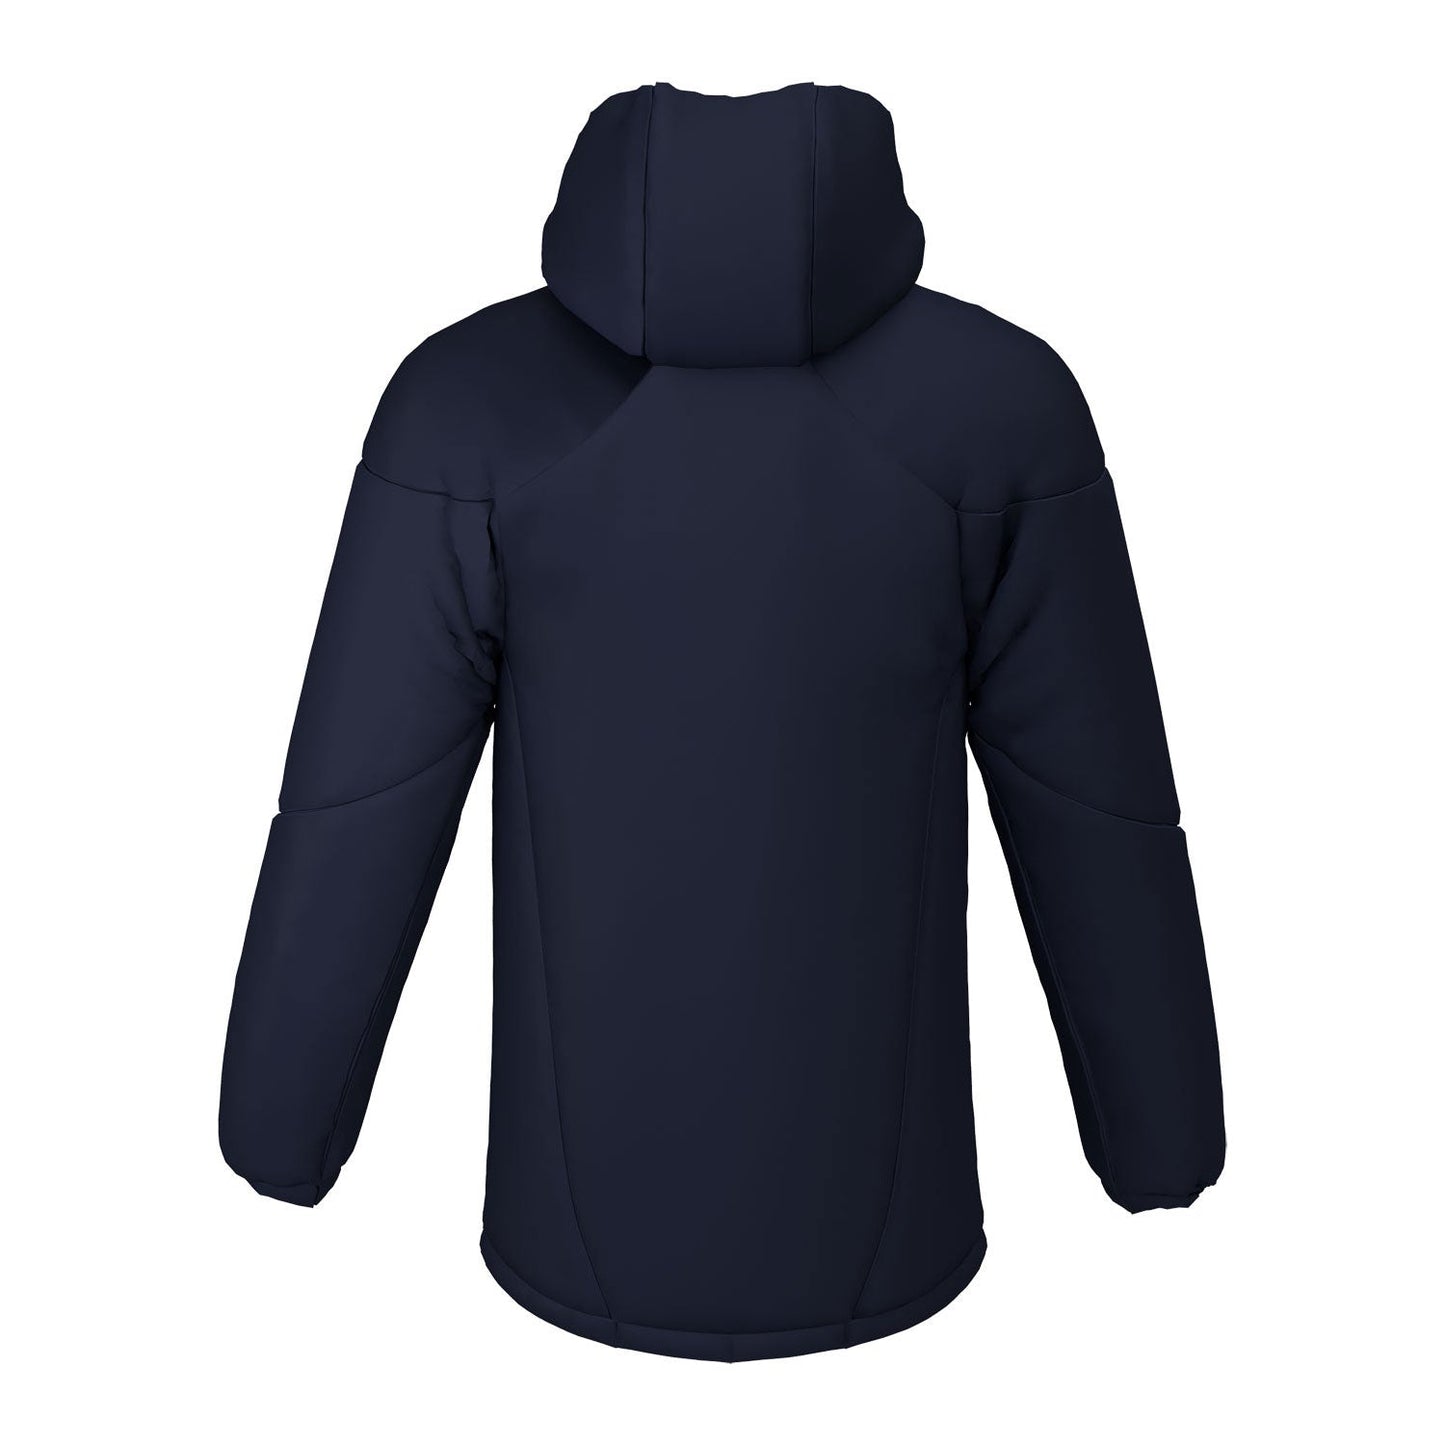 Said Business School Rowing Club Contoured Thermal Jacket